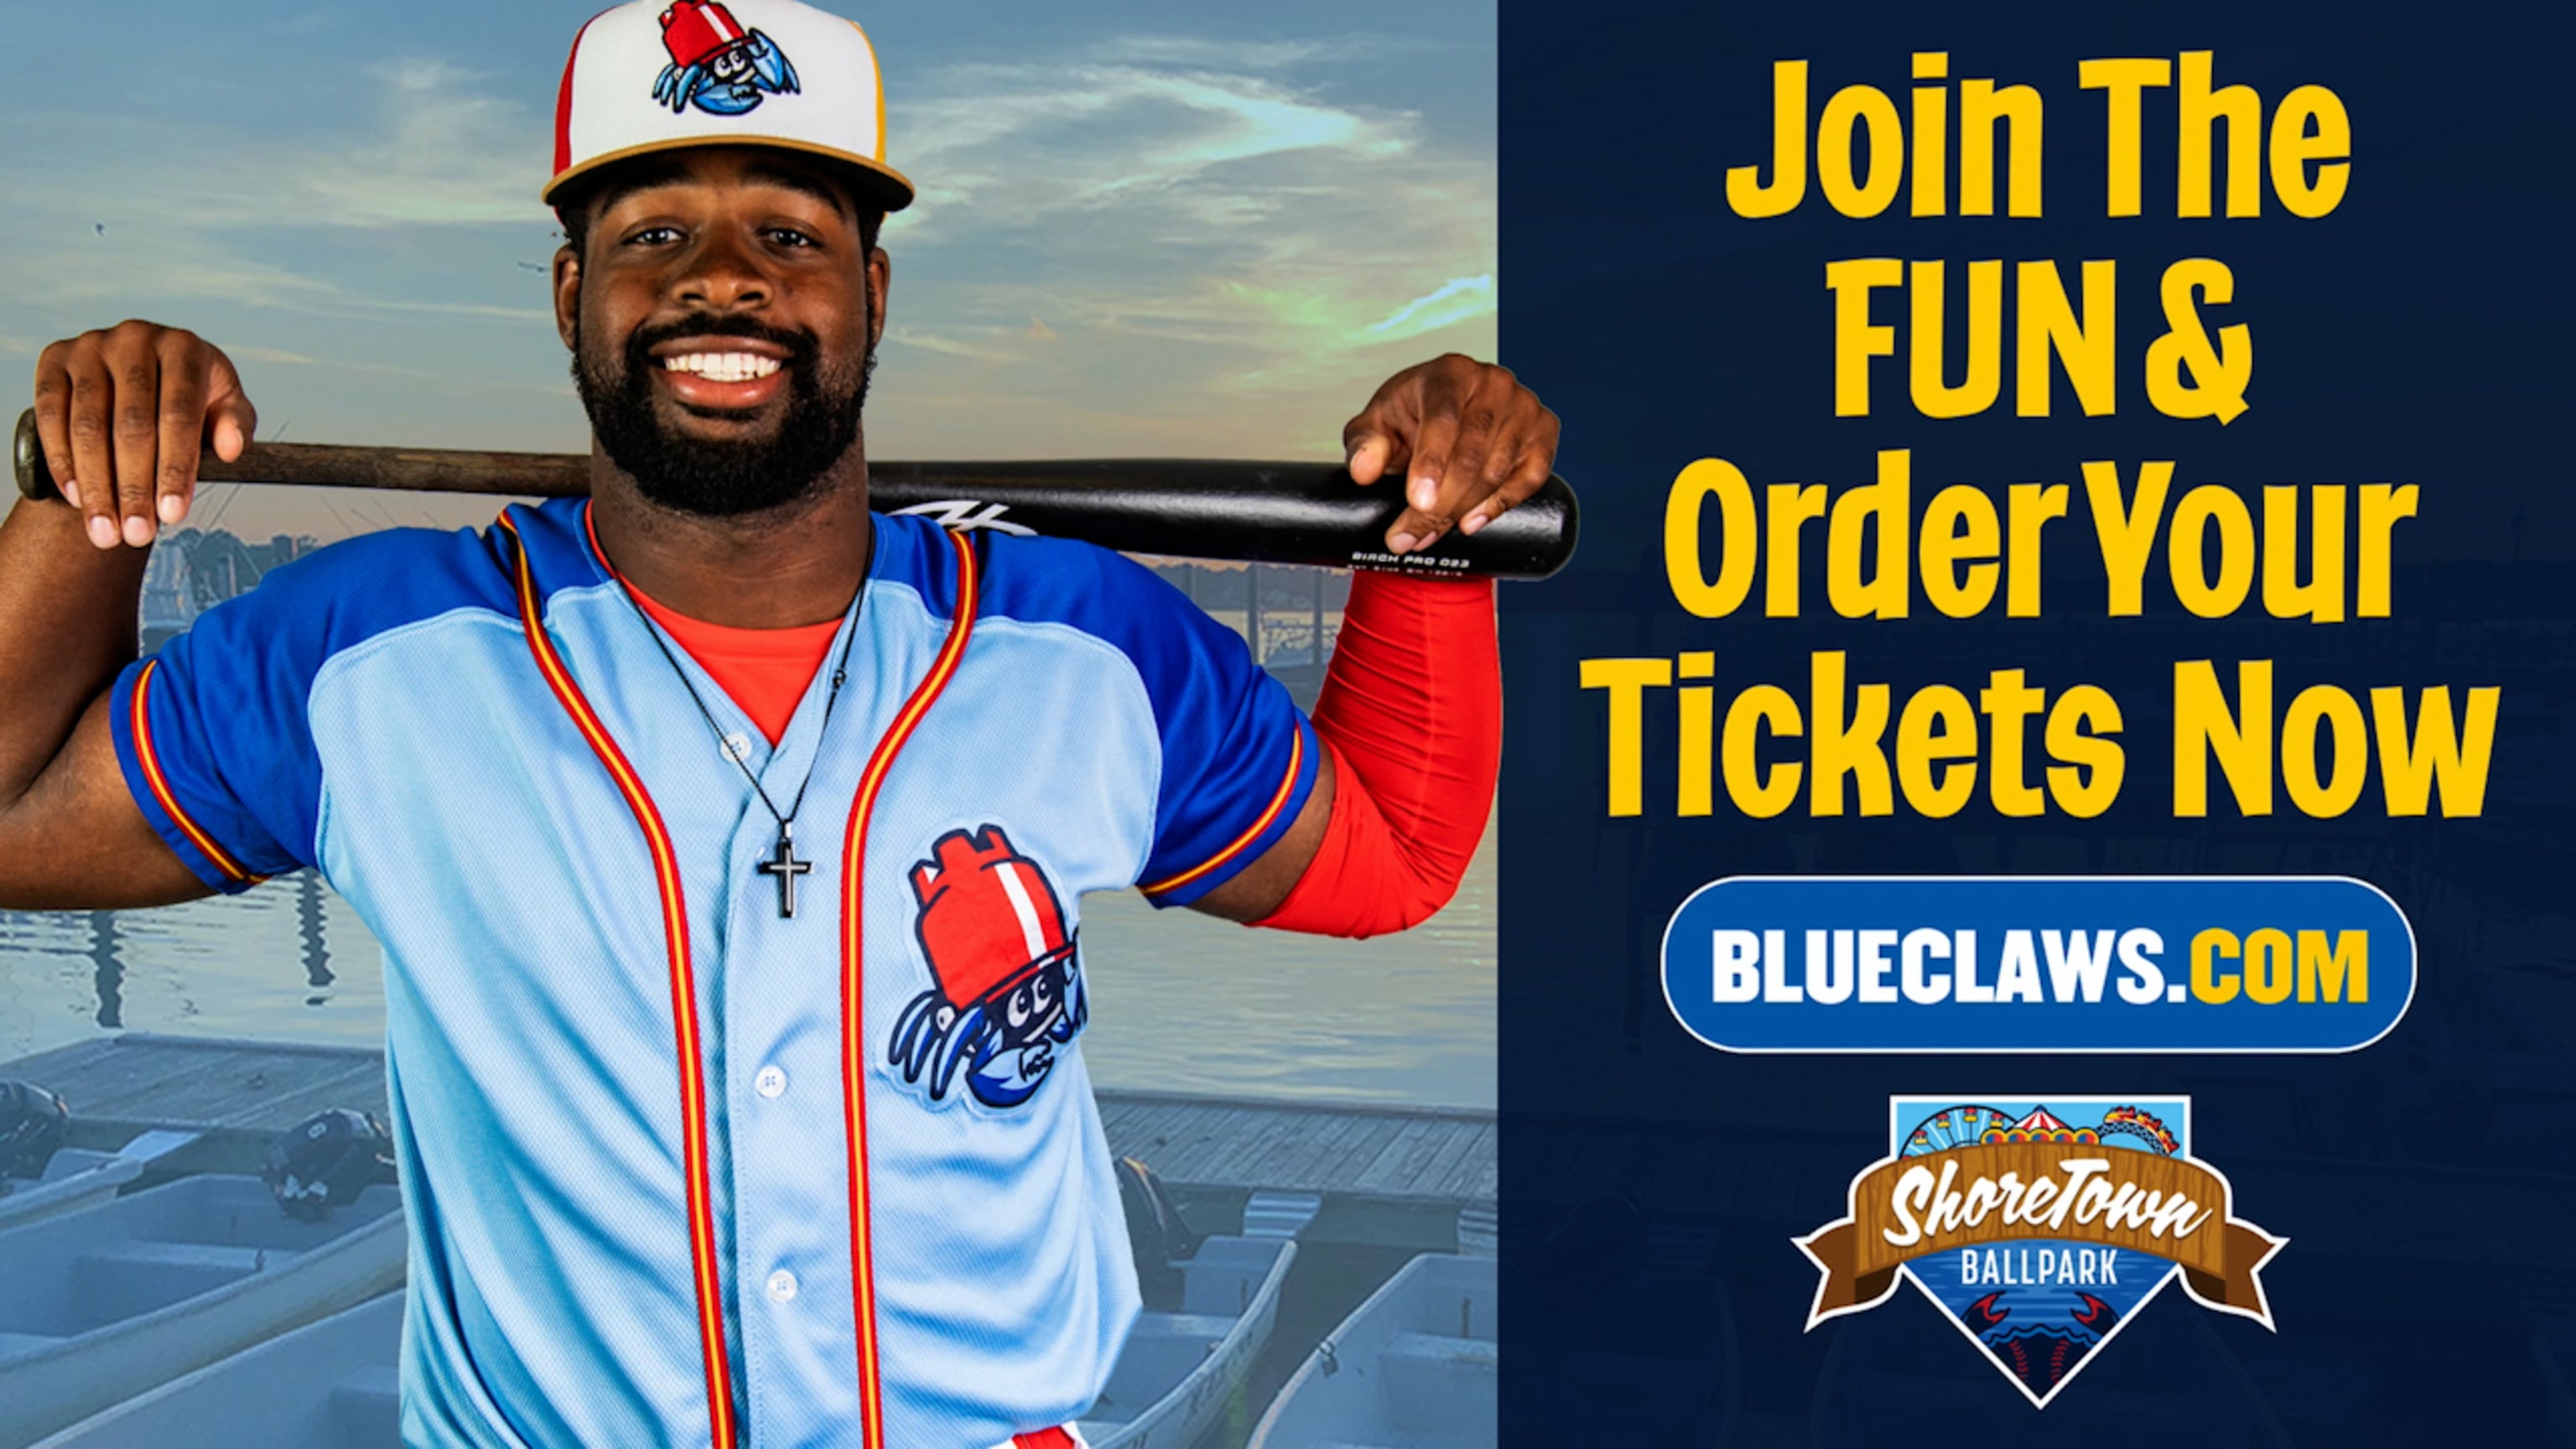 Jersey Shore BlueClaws (@blueclaws1) • Instagram photos and videos